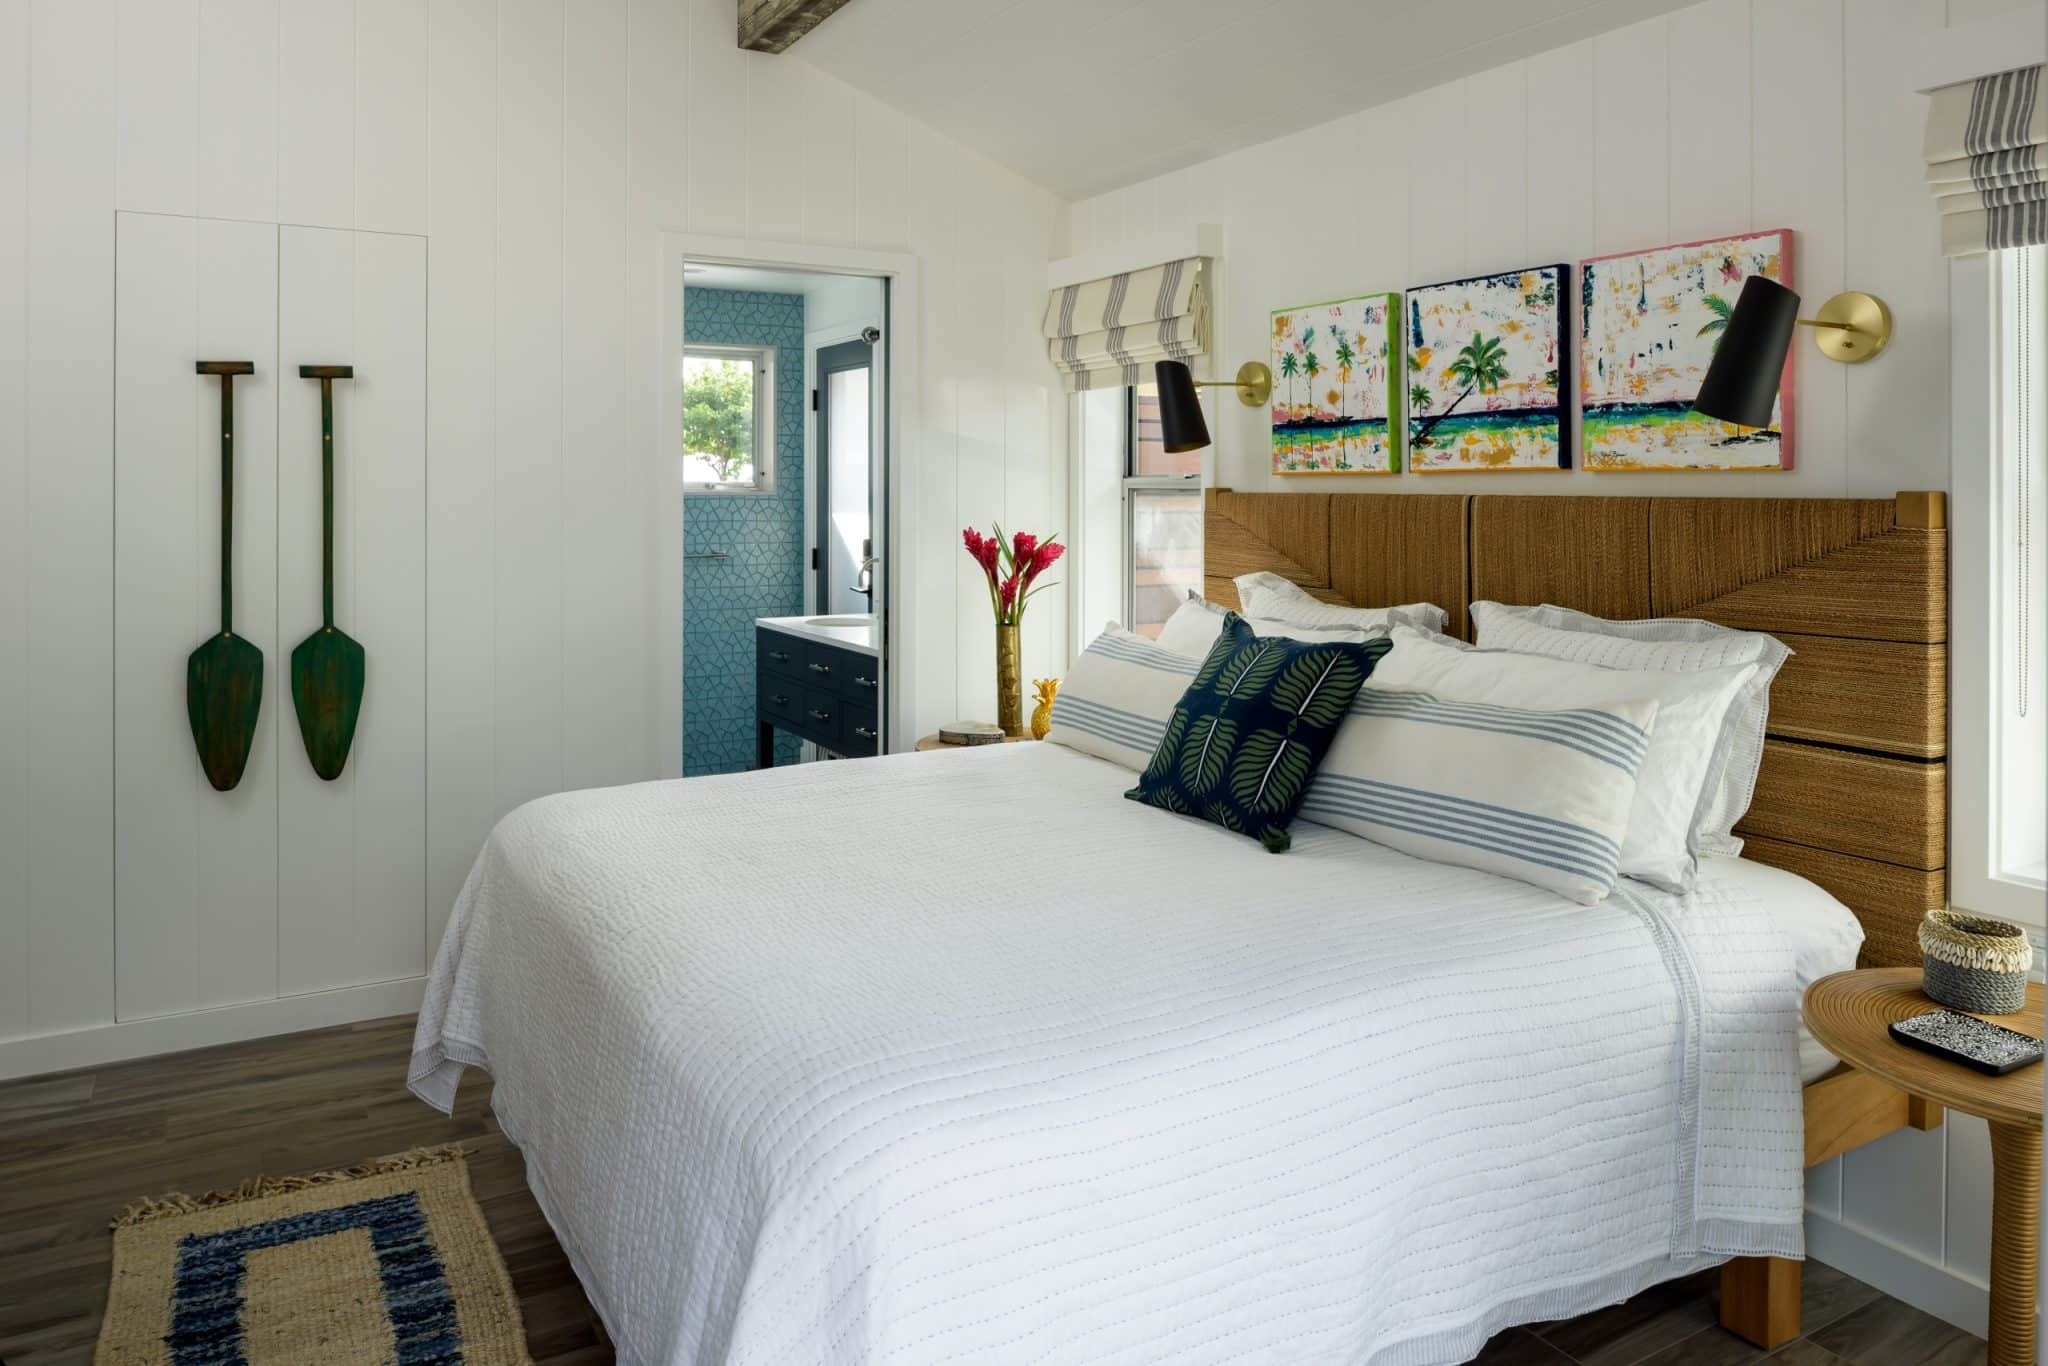 How to Incorporate Natural Elements, Like Driftwood or Seashells in a Coastal Bedroom